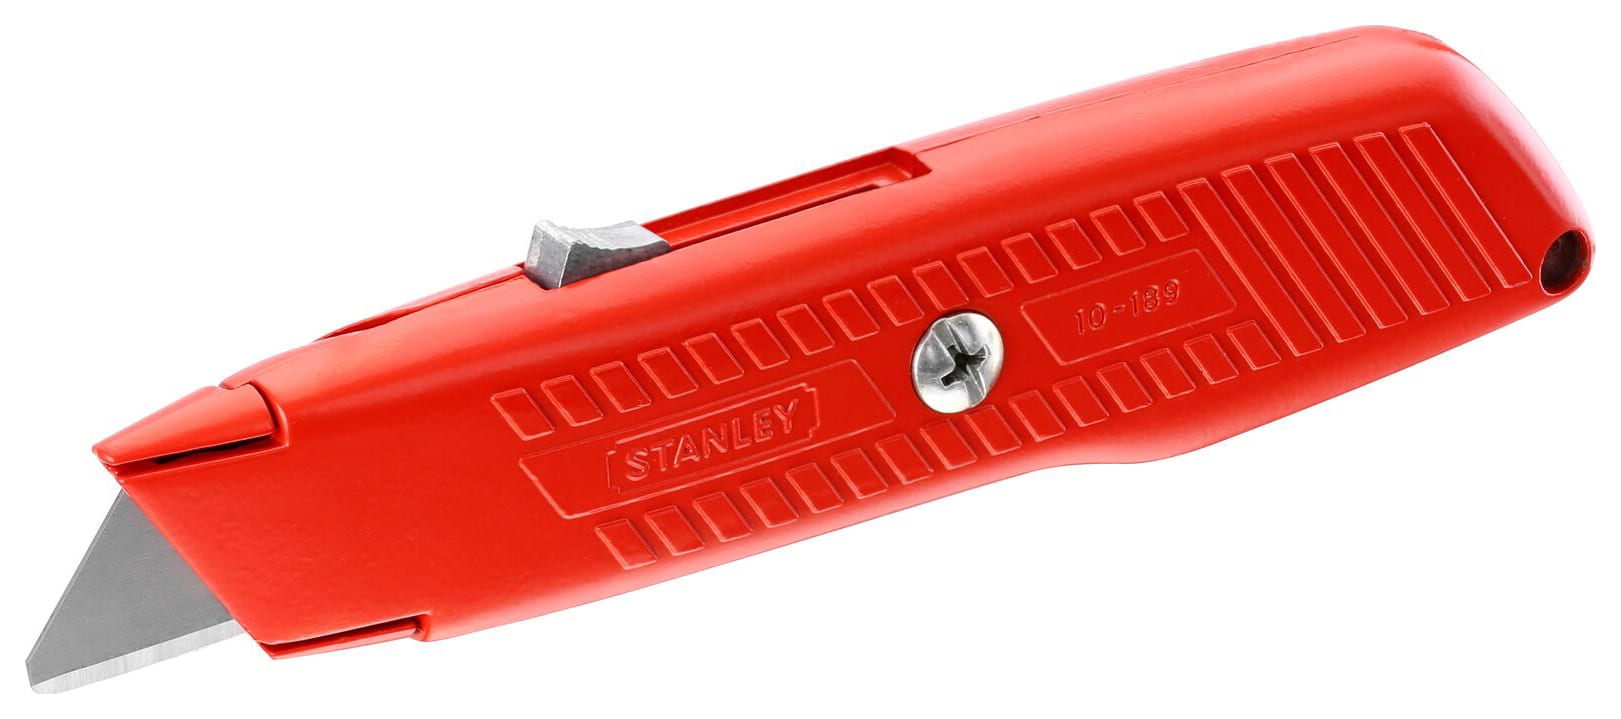 Stanley 0-10-189 Self-Retracting Safety Utility Knife